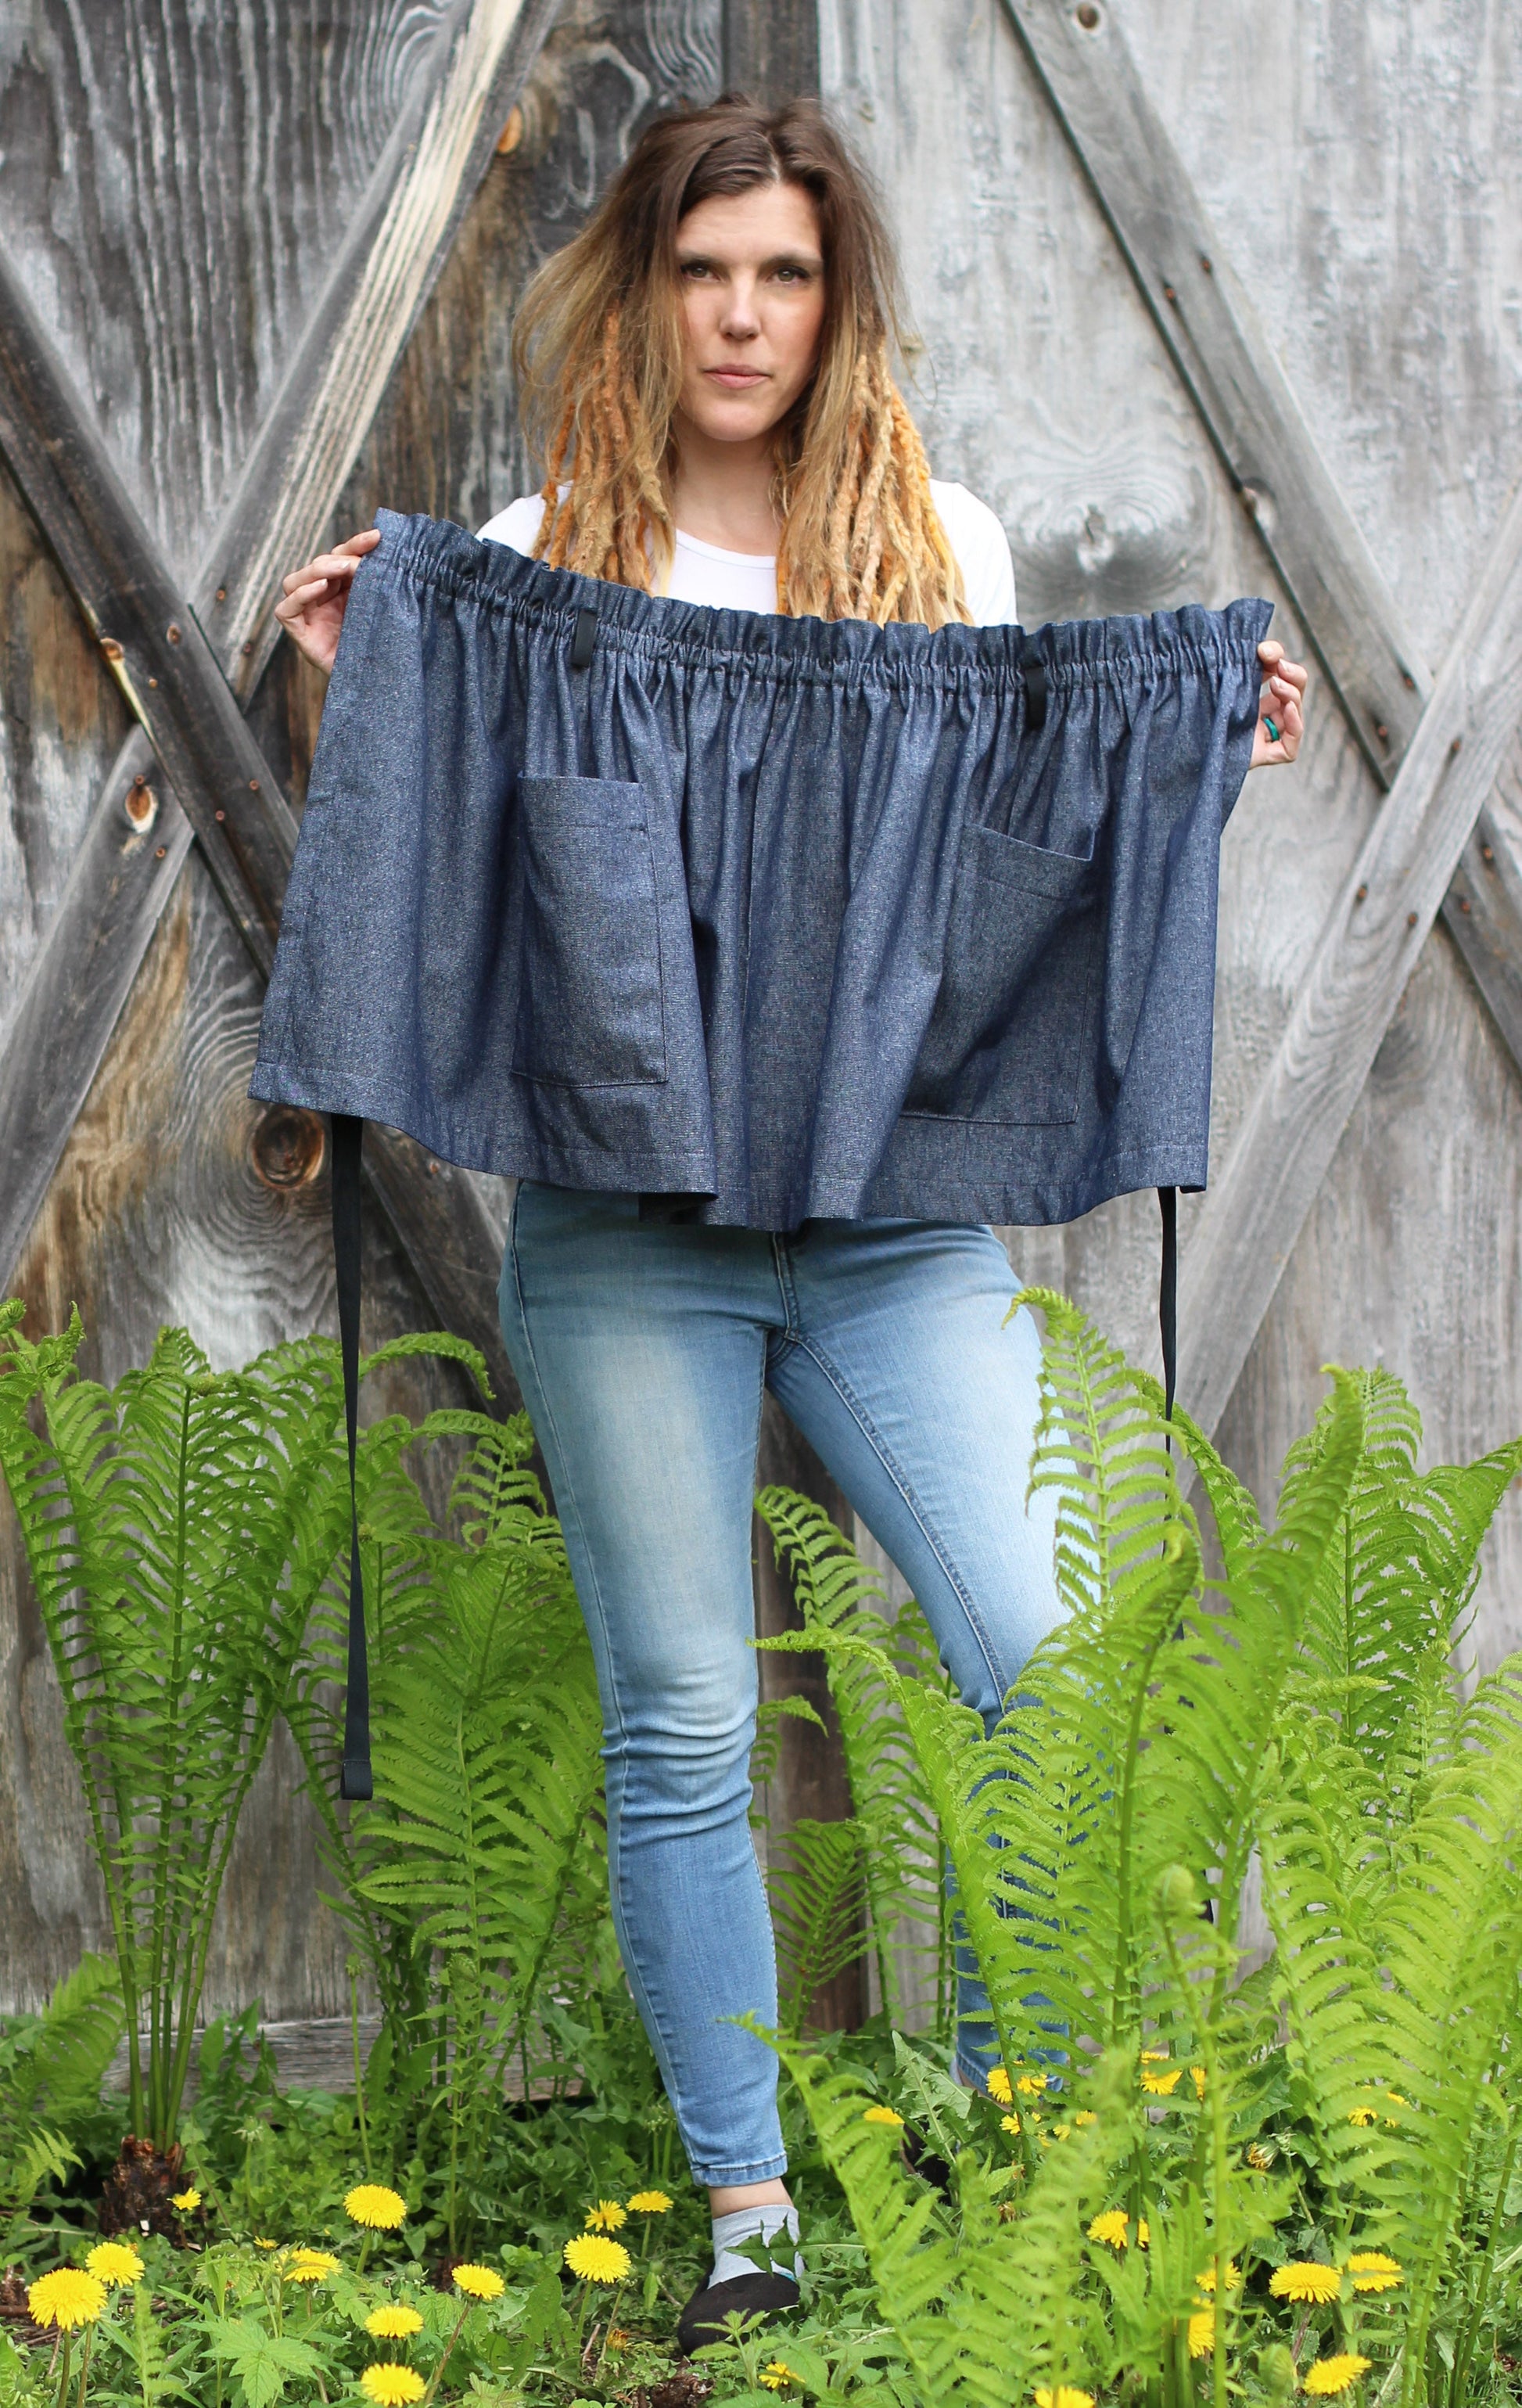 Half Apron in Denim, model holds the apron up for a wide view.